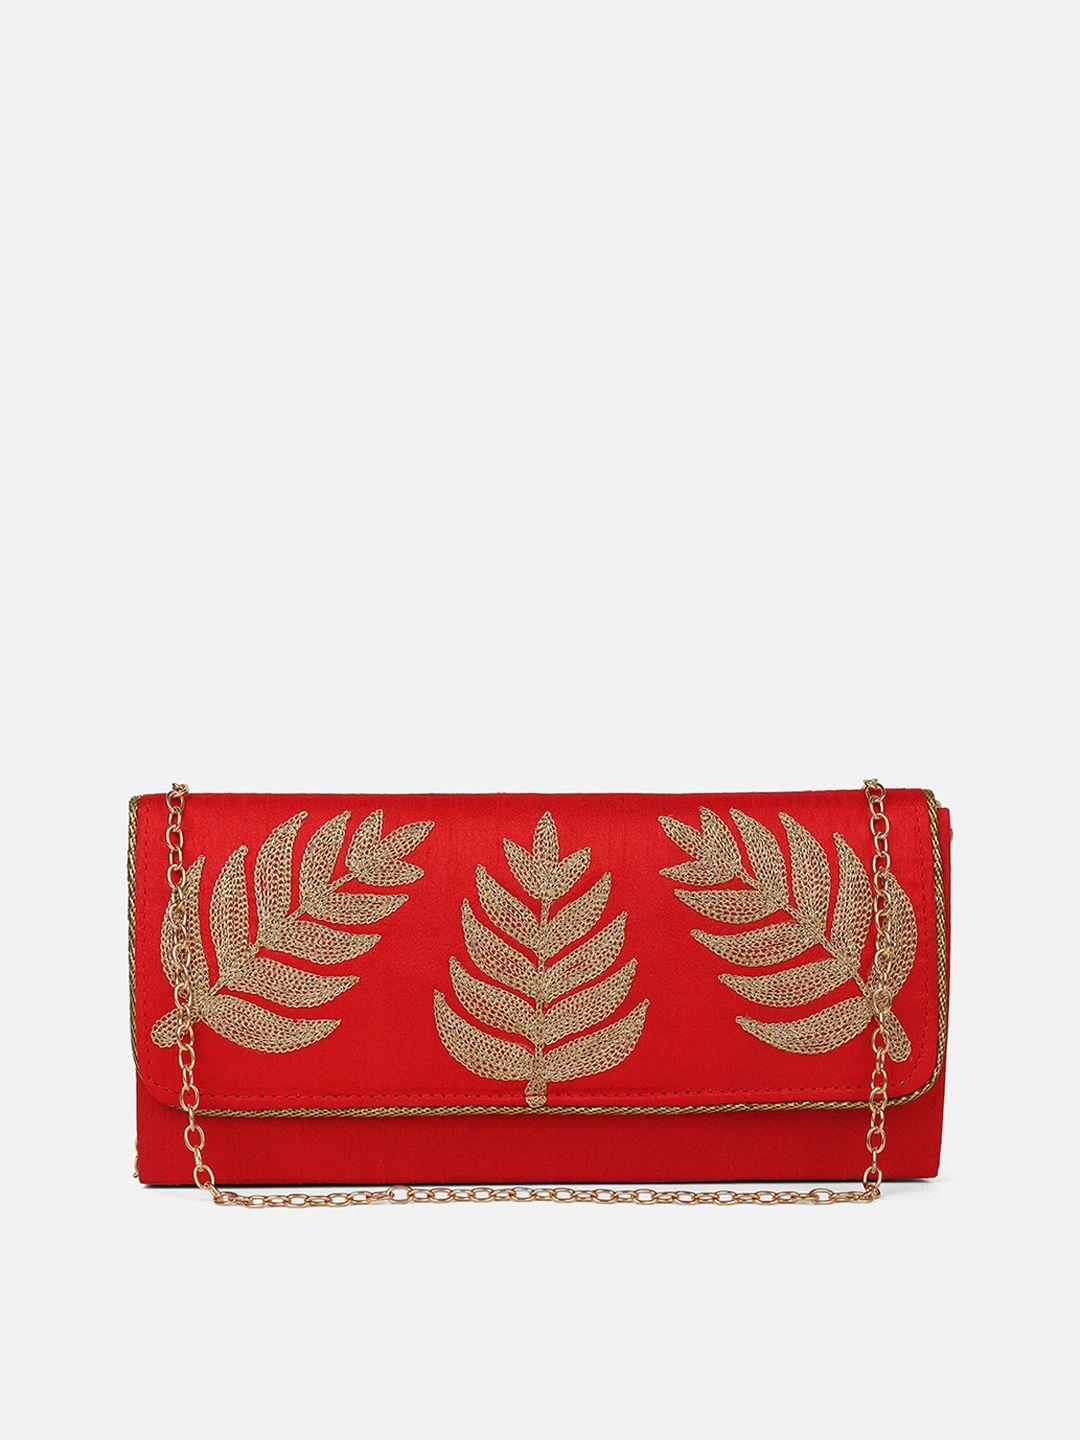 aditi wasan embroidered envelope clutch